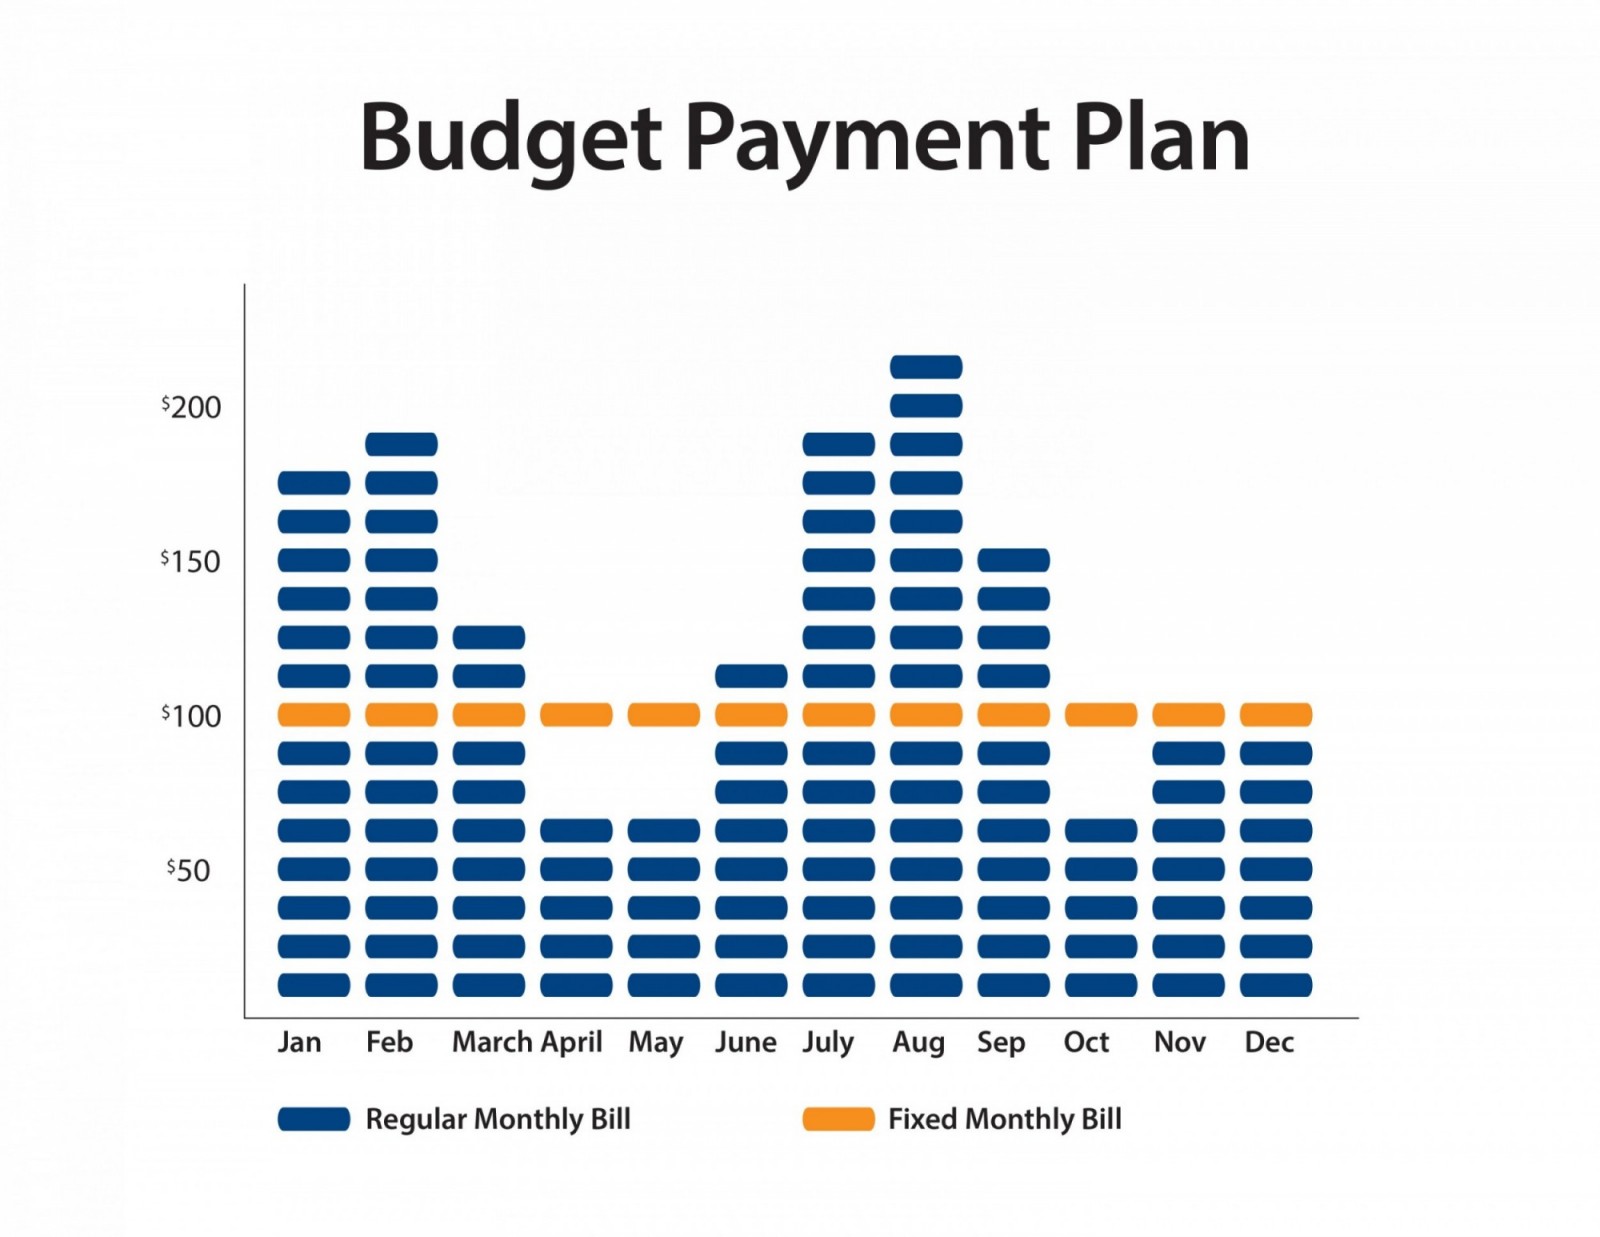 (Image) Budget Payment Plan chart